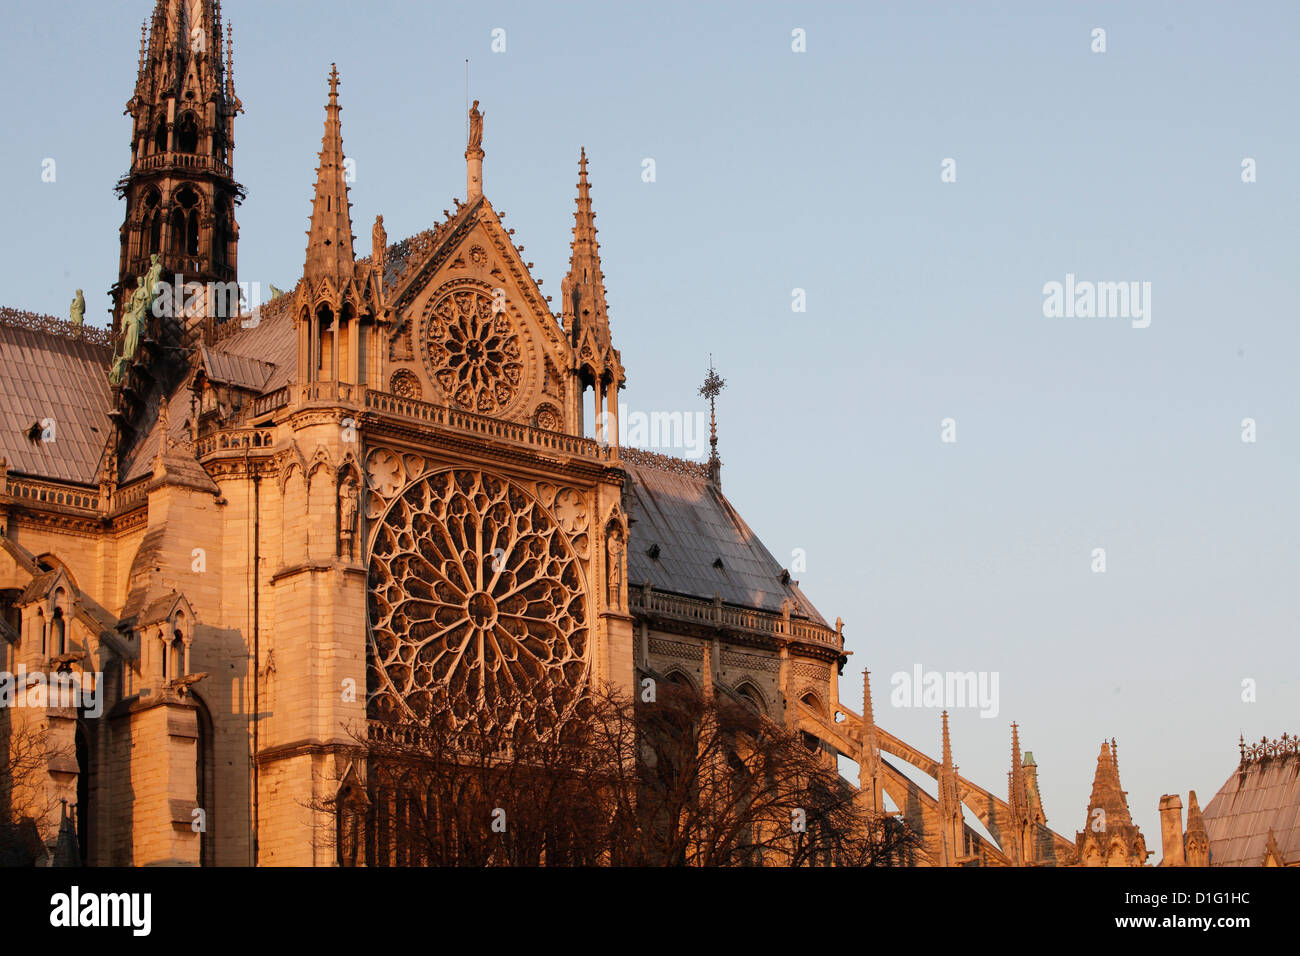 Rose window on South facade, Notre Dame Cathedral, Paris, France, Europe Stock Photo